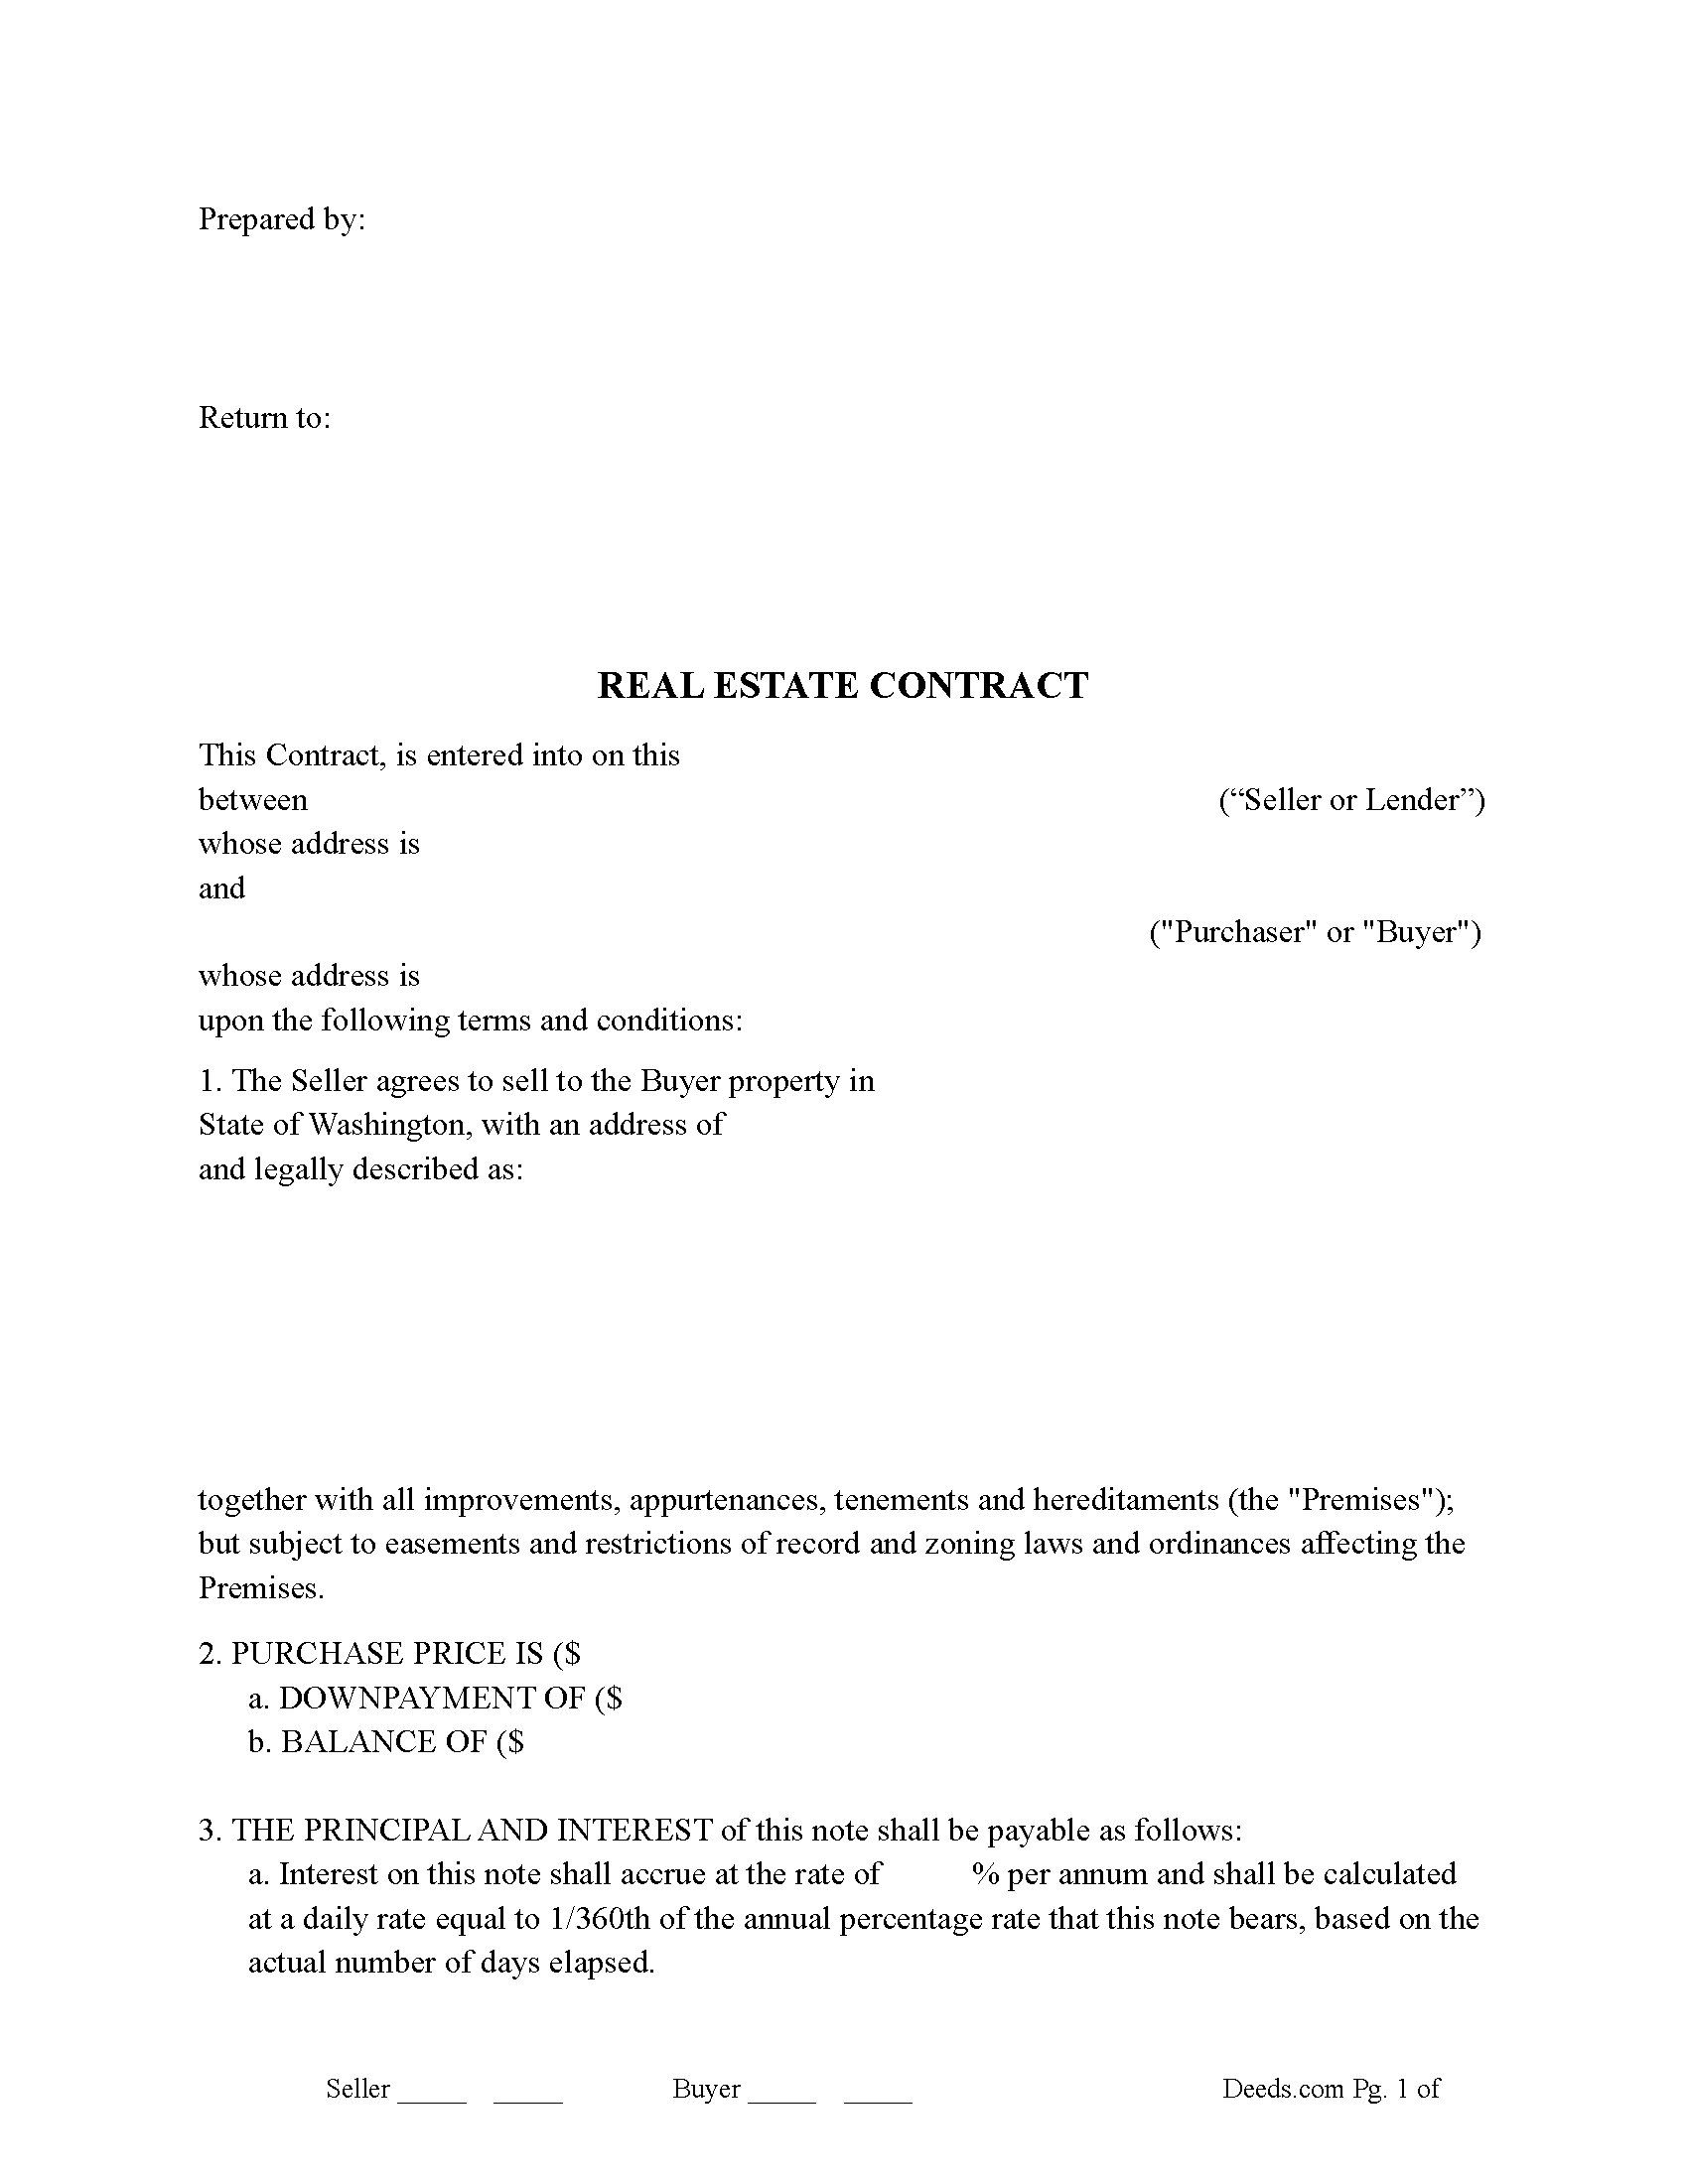 Douglas County Real Estate Contract Form